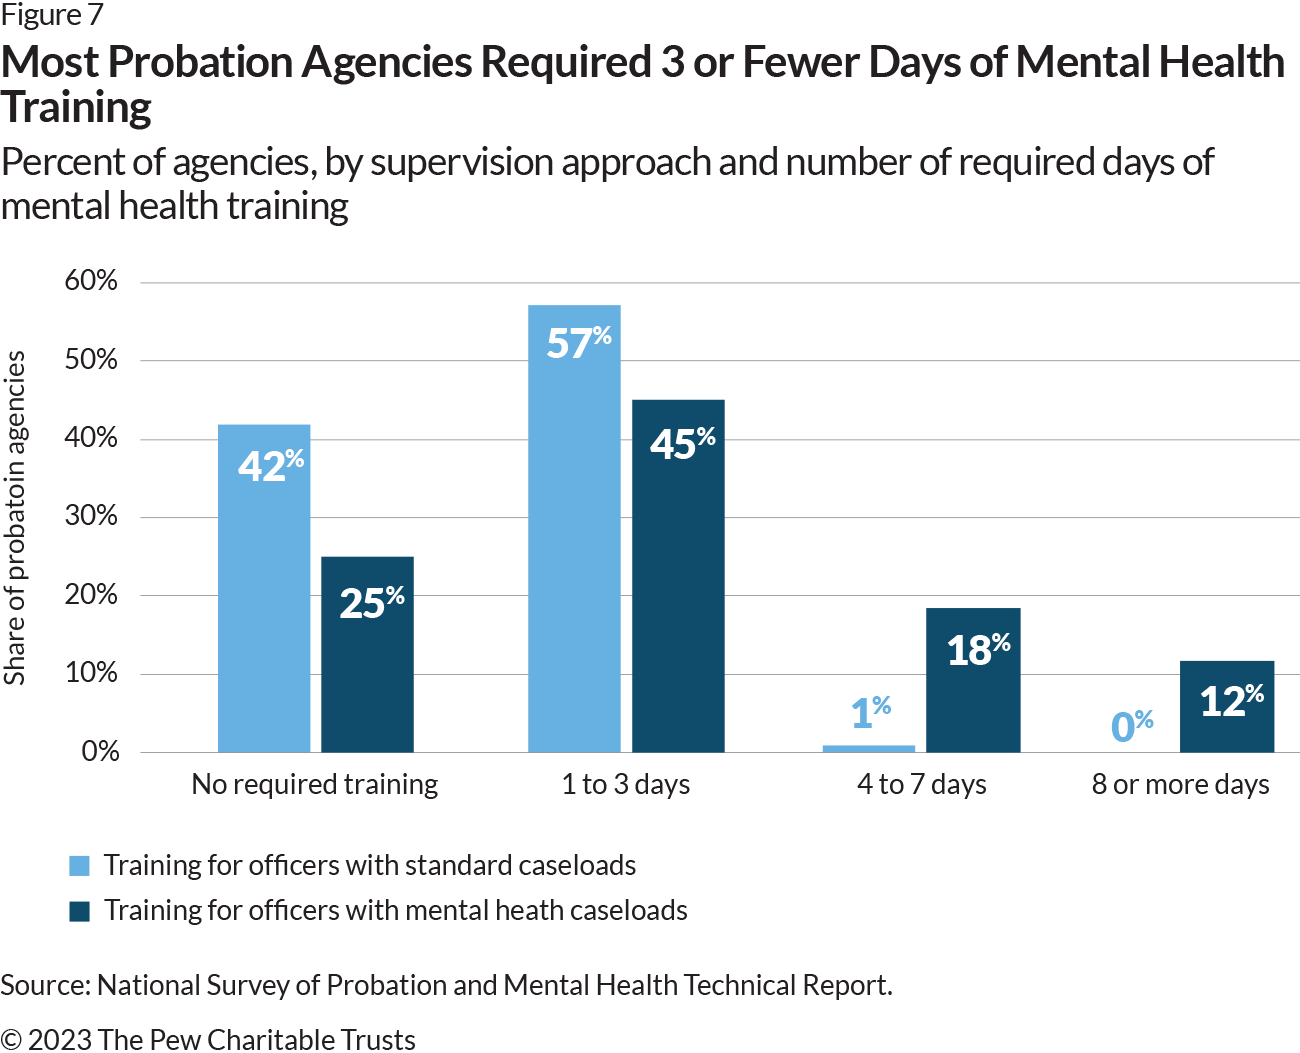 Two-part column chart showing the percent of agencies by supervision approach and number of required days of mental health training. The column chart on the left represents training for officers with standard caseloads, and the column chart on the right represents training for officers with mental health caseloads. For officers with standard caseloads, 42% of probation agencies required no training, 57% required one to three days, 1% required four to seven days, and 0% required eight or more days. For officers with mental health caseloads, 25% of probation agencies required no training, 45% required one to three days, 18% required four to seven days, and 12% required eight or more days. For both charts, bars originate along the horizontal axis and correspond to the category of required days of mental health training. Bars climb along the vertical axis to indicate the share of probation agencies.